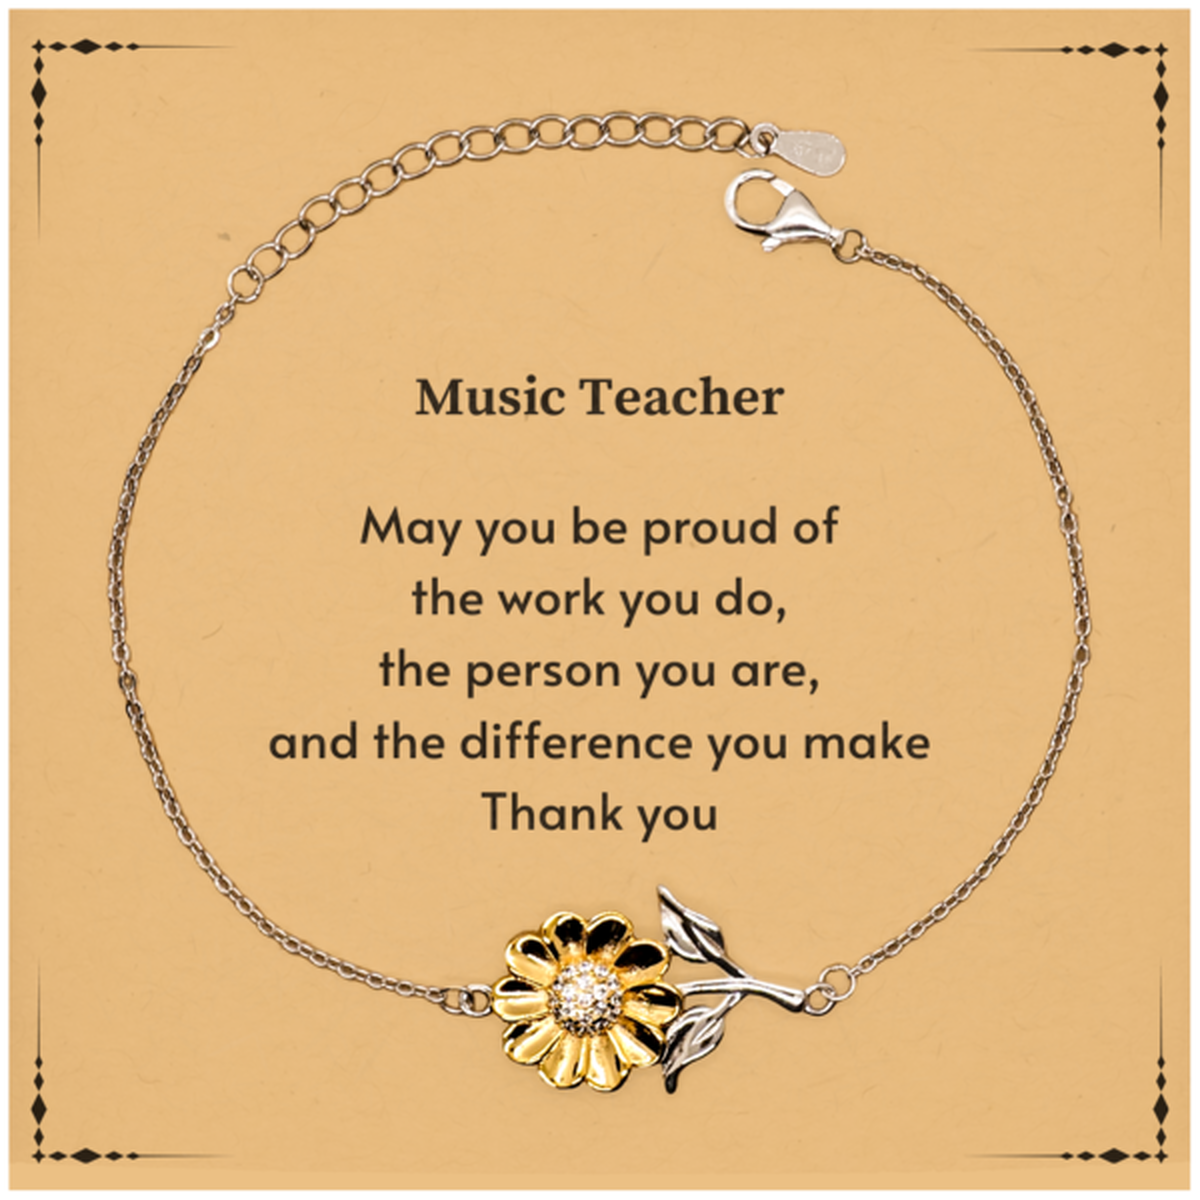 Heartwarming Sunflower Bracelet Retirement Coworkers Gifts for Music Teacher, Music Teacher May You be proud of the work you do, the person you are Gifts for Boss Men Women Friends